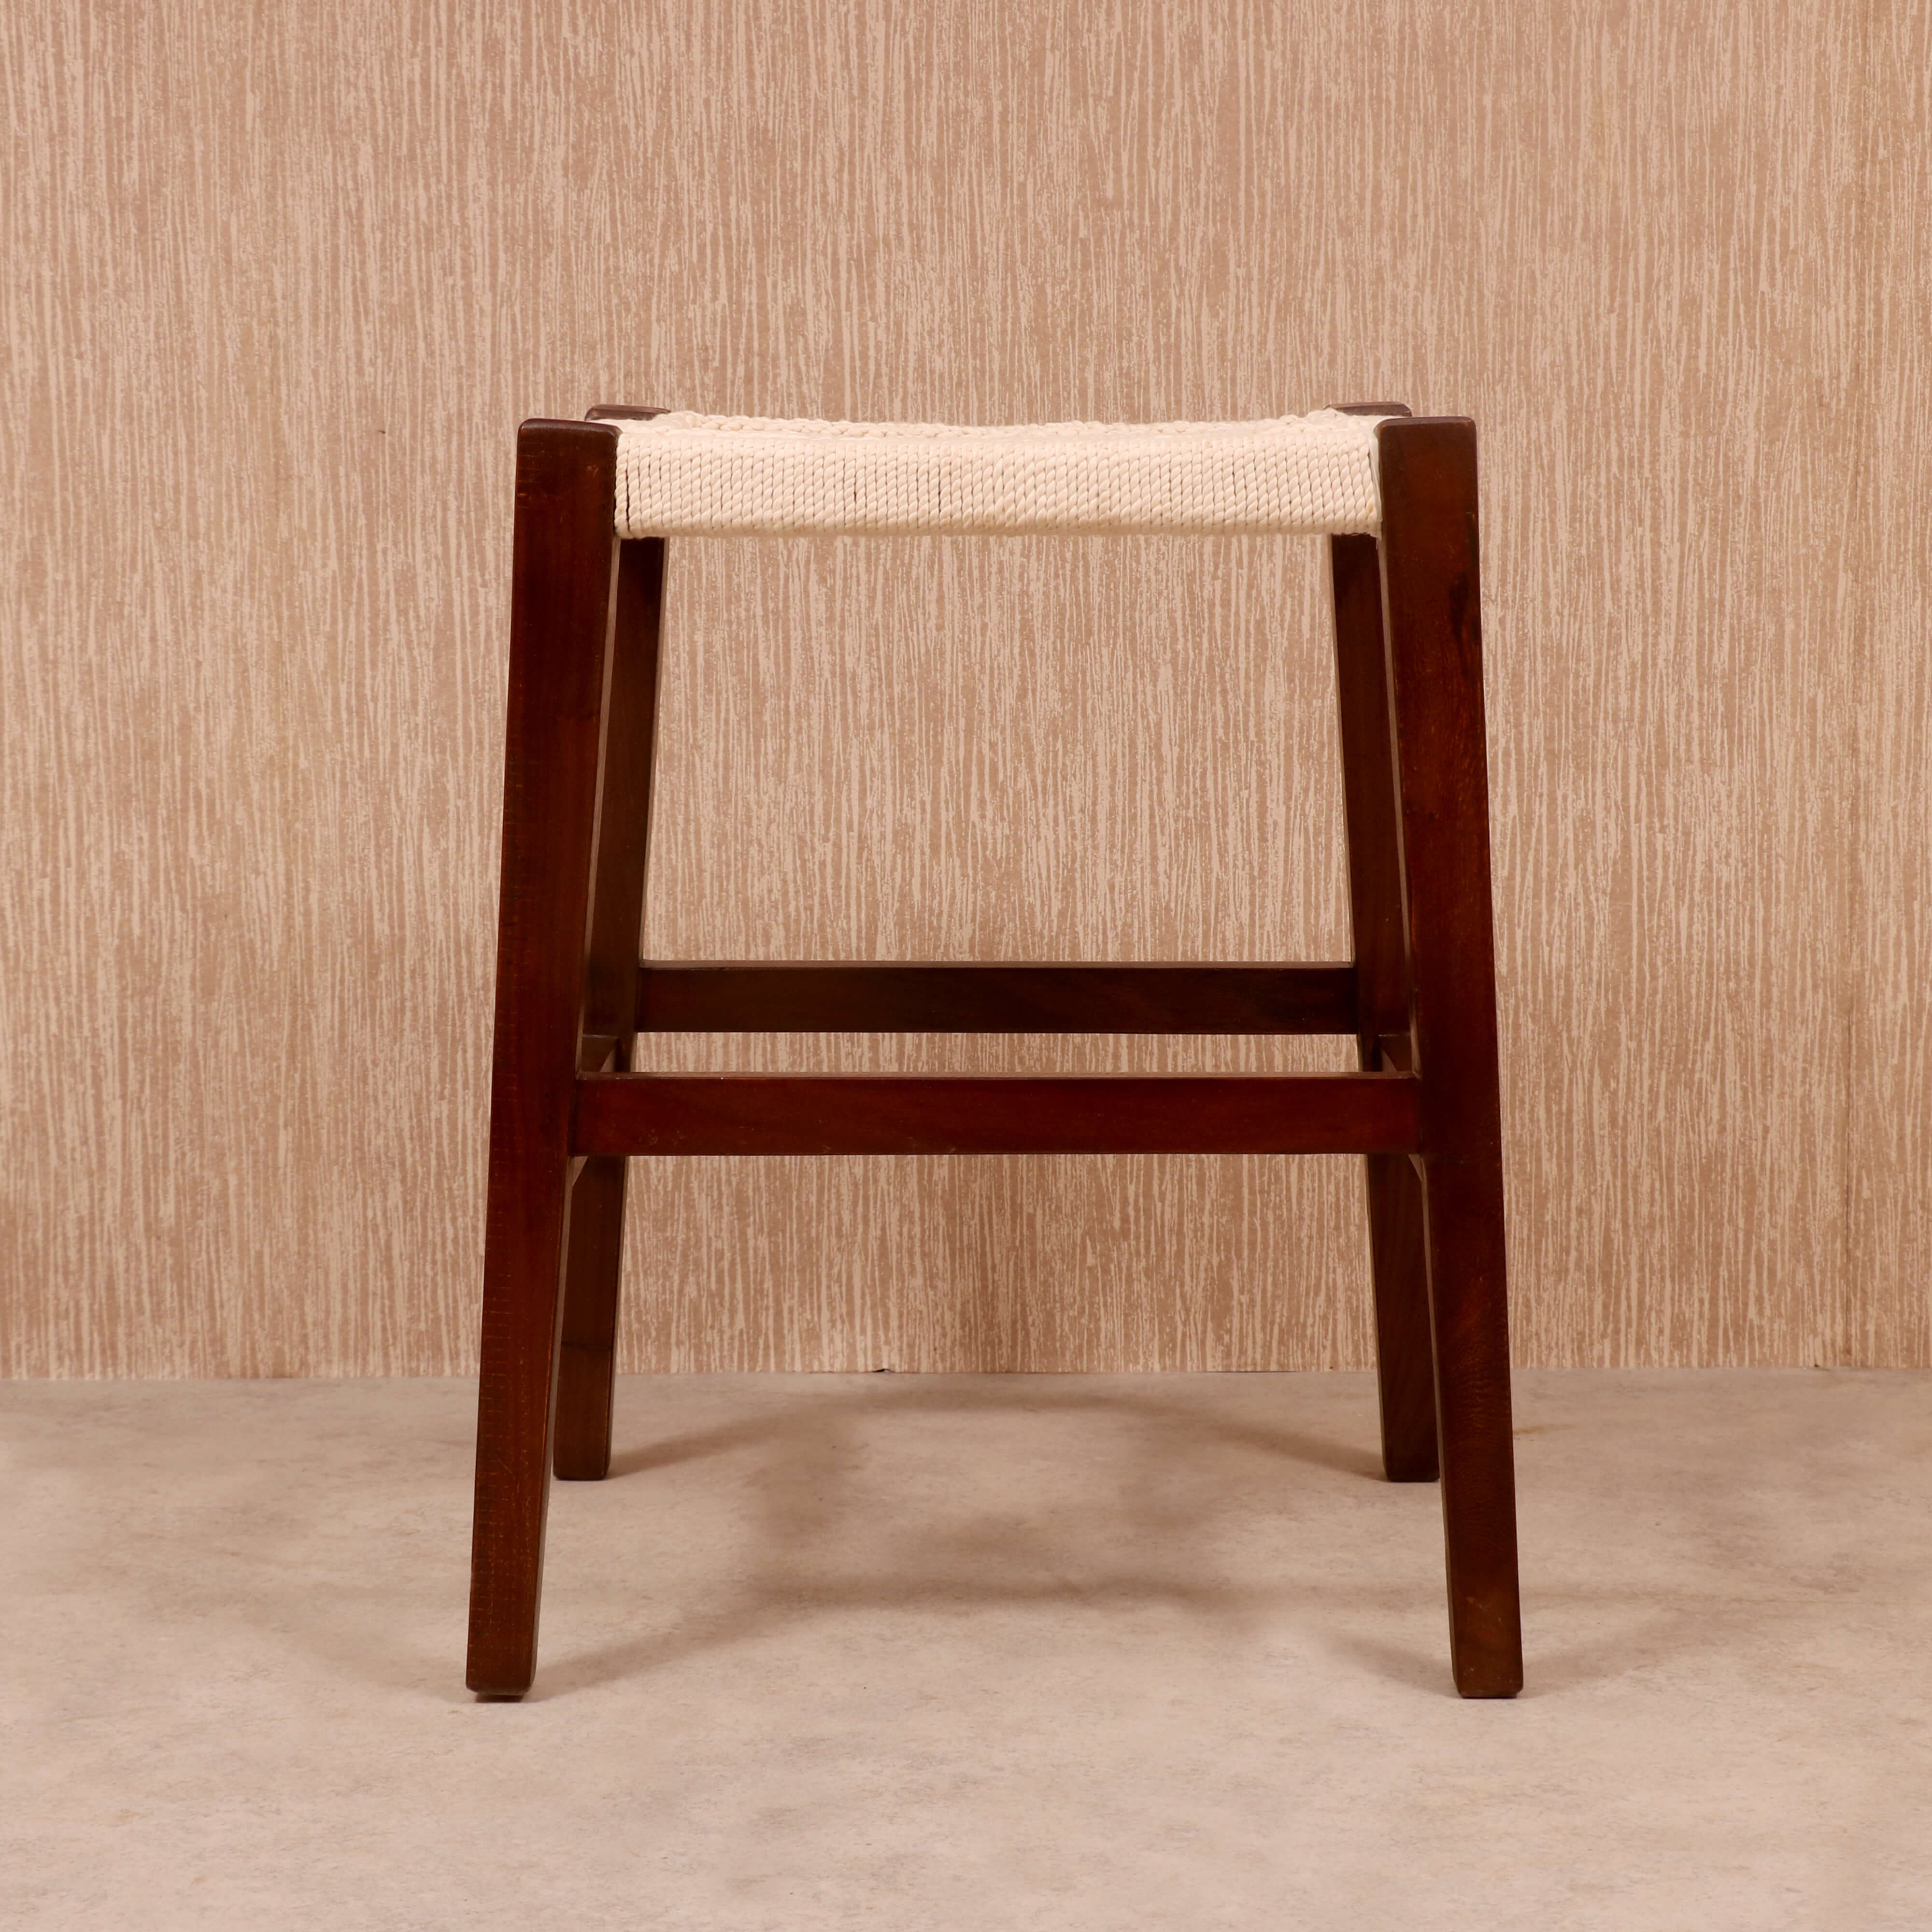 Classic Wooden Woven Stool Stool